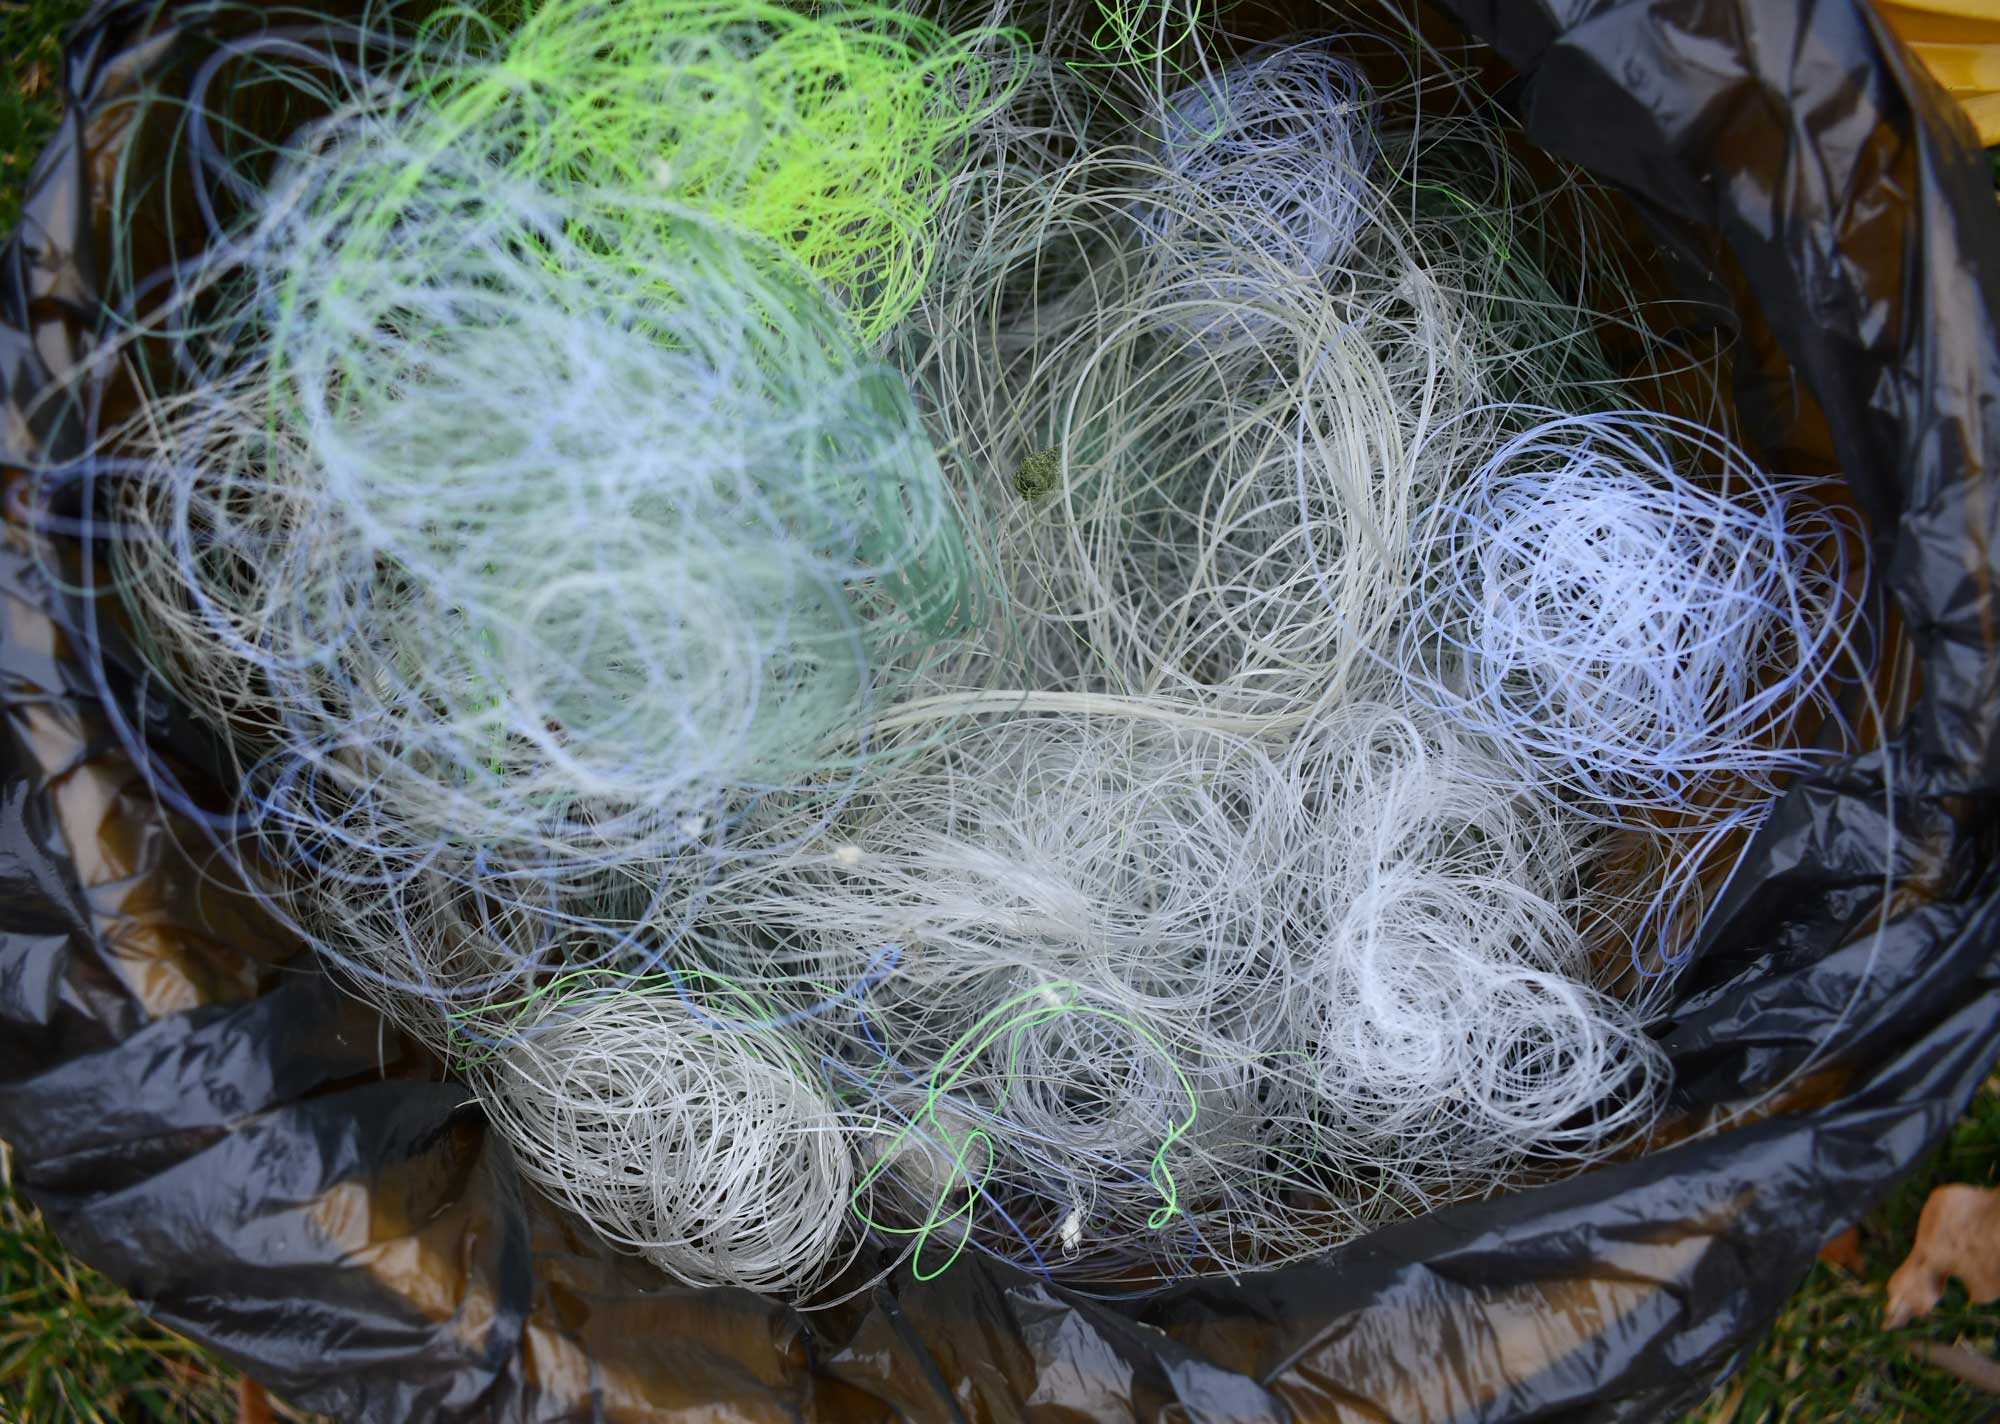 A large collection of fishing line waiting to be recycled.